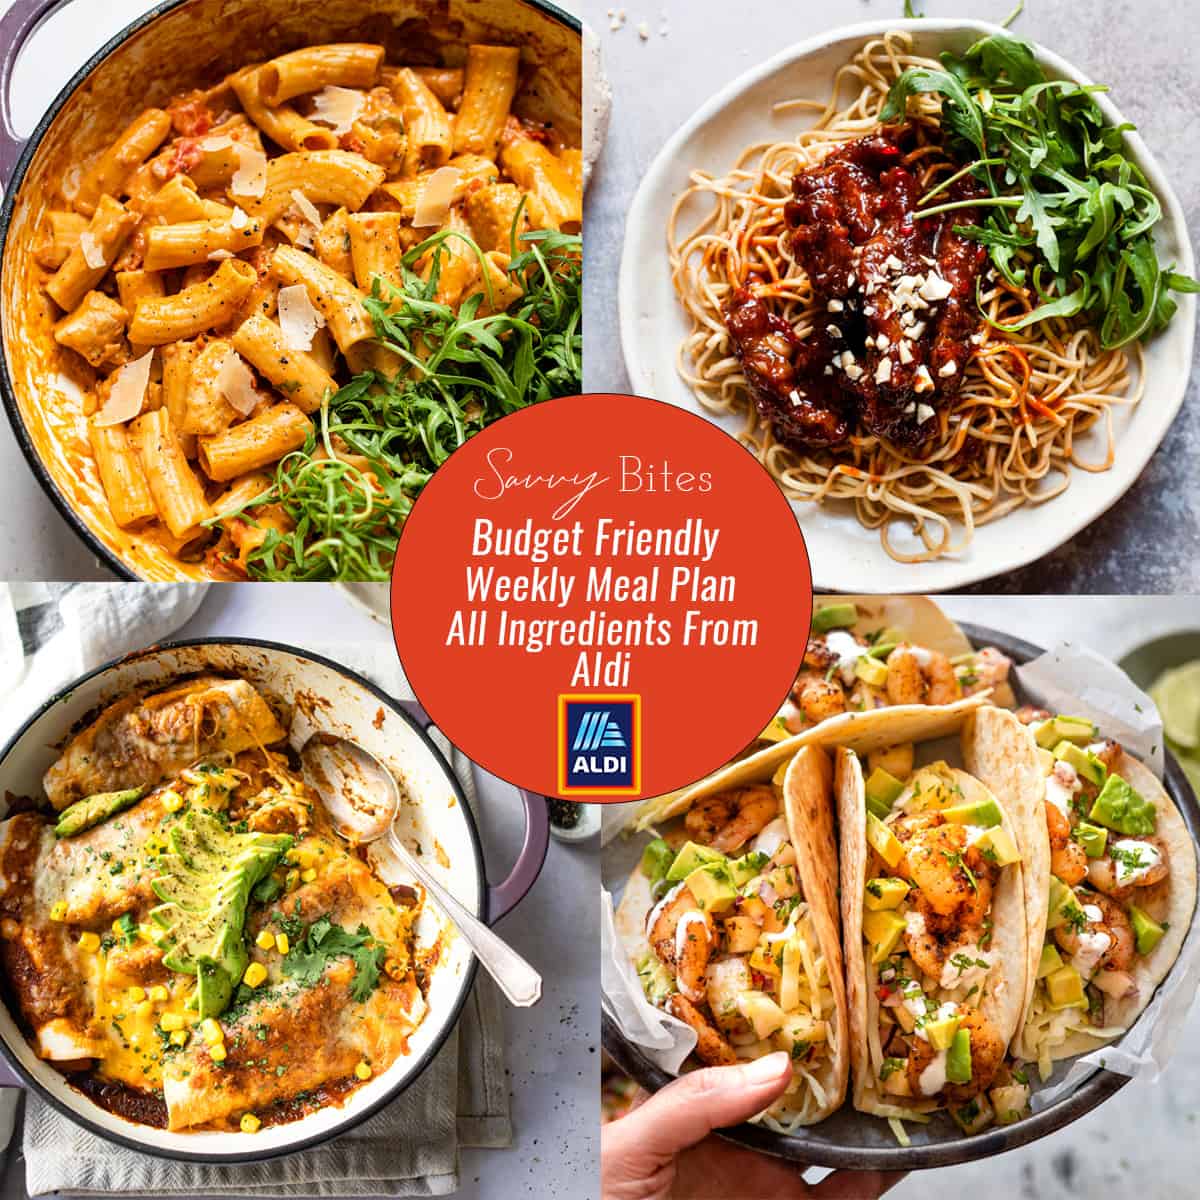 Aldi budget meal plan July 12 photo collage